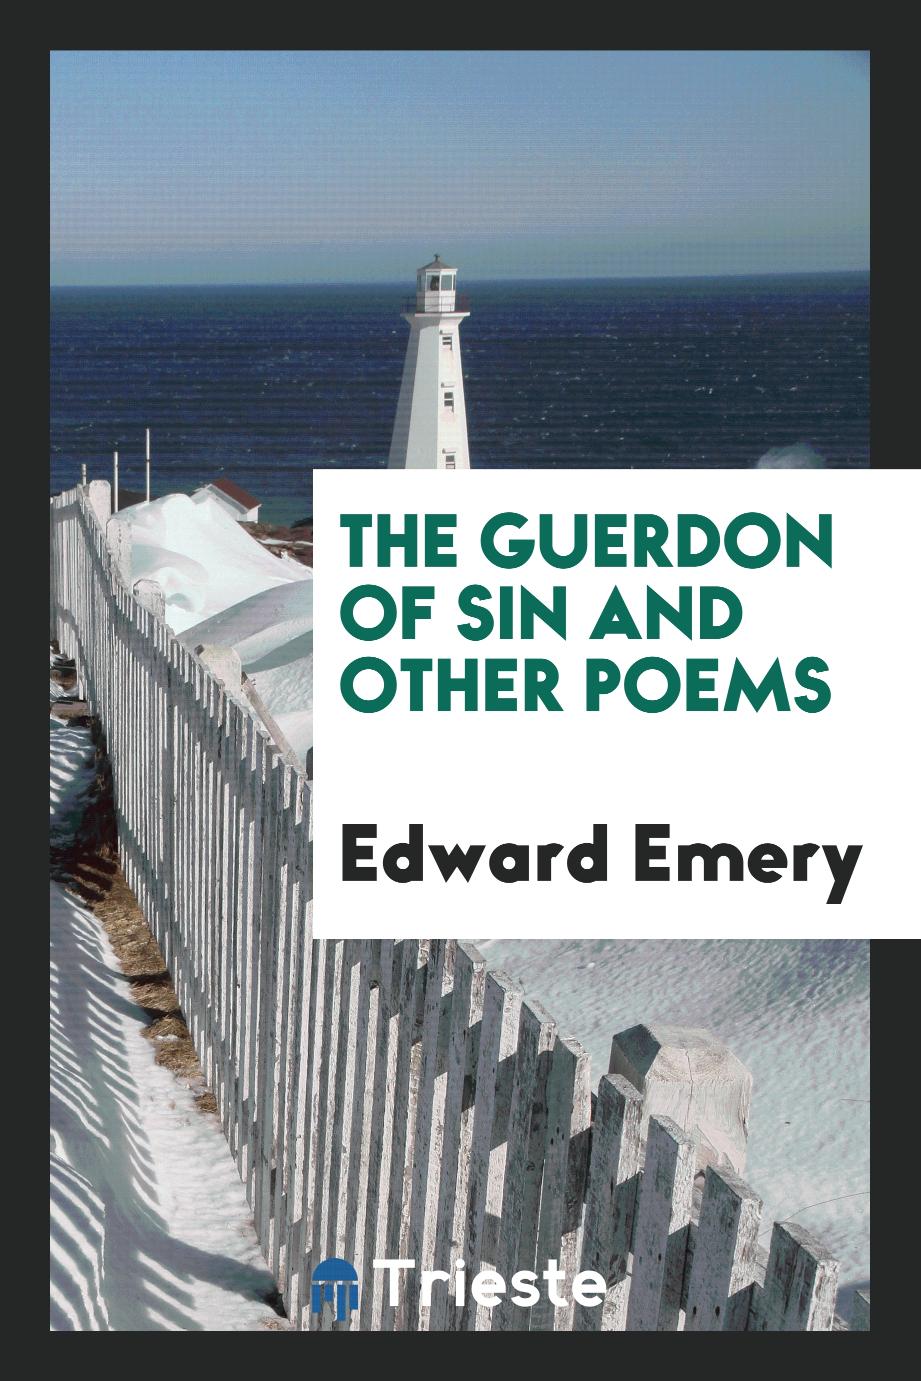 The guerdon of sin and other poems